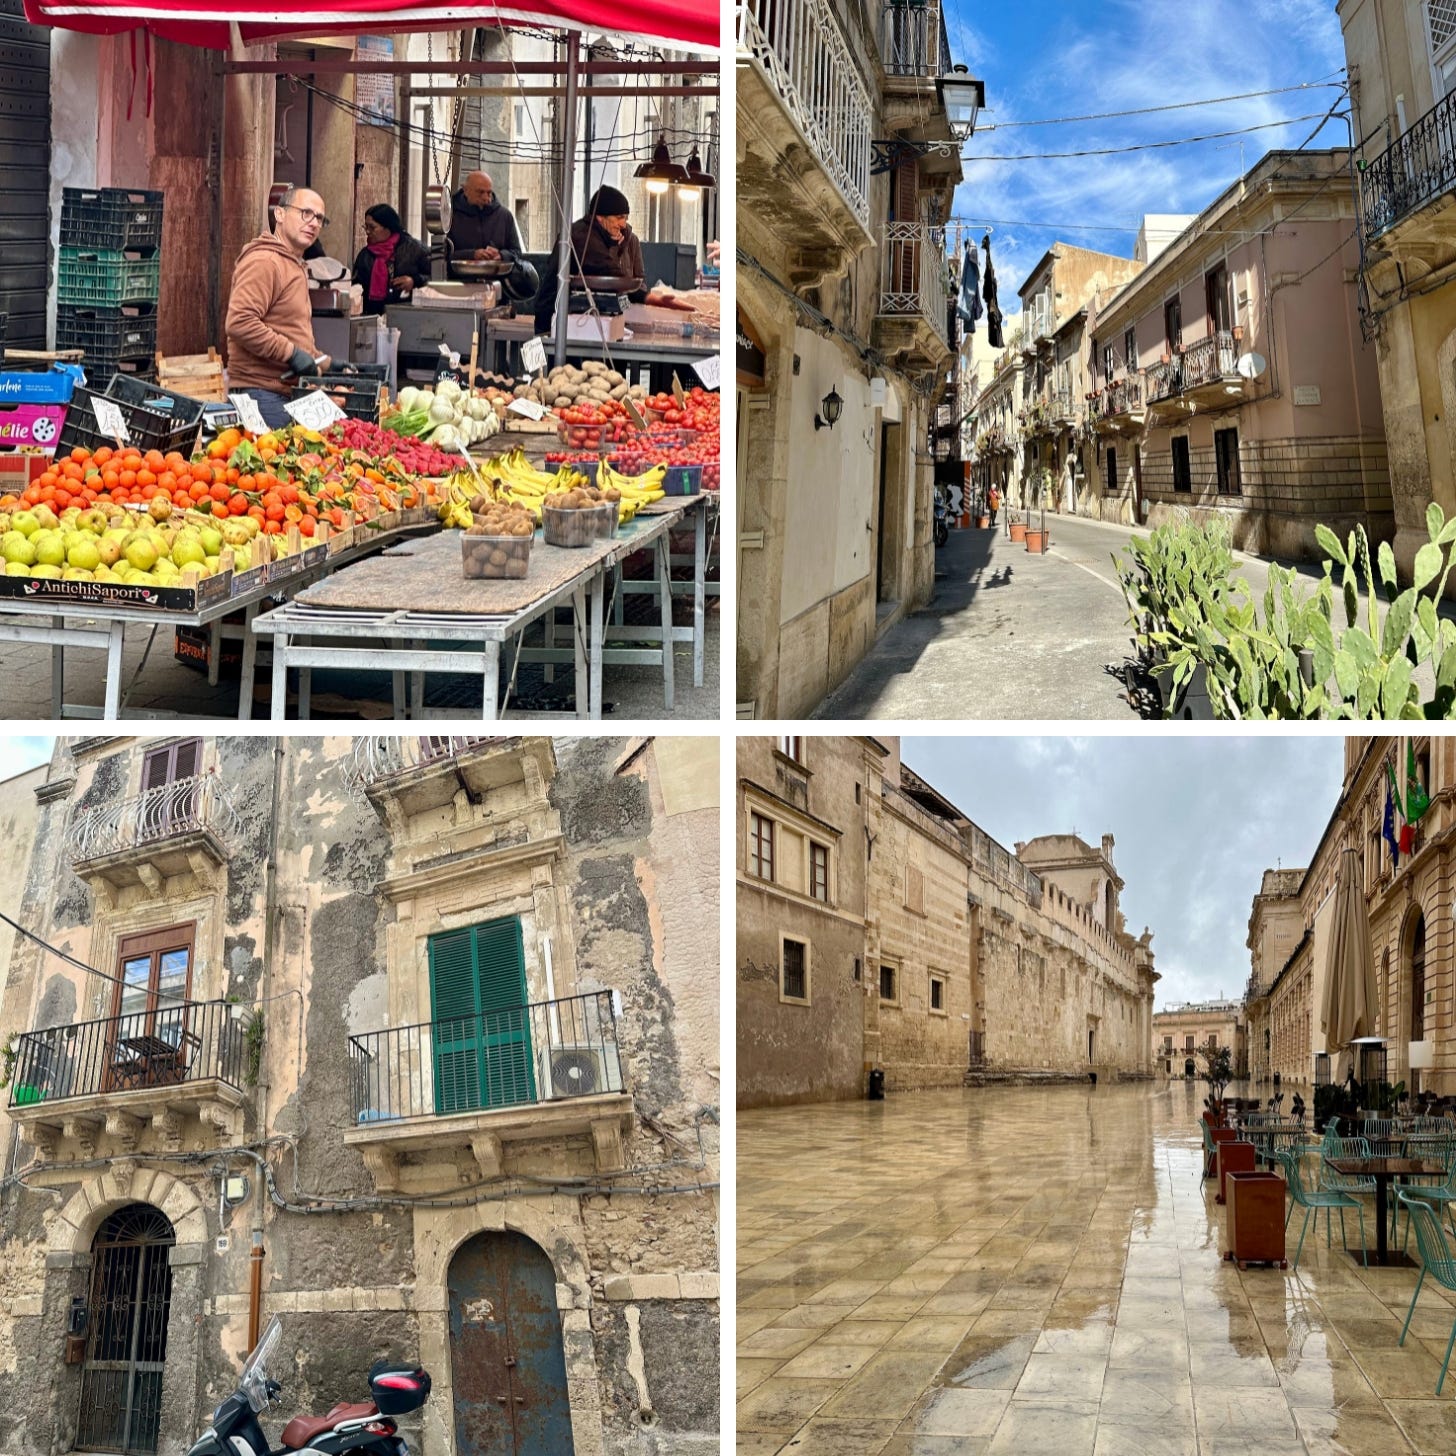 Images show street scenes from Sicily